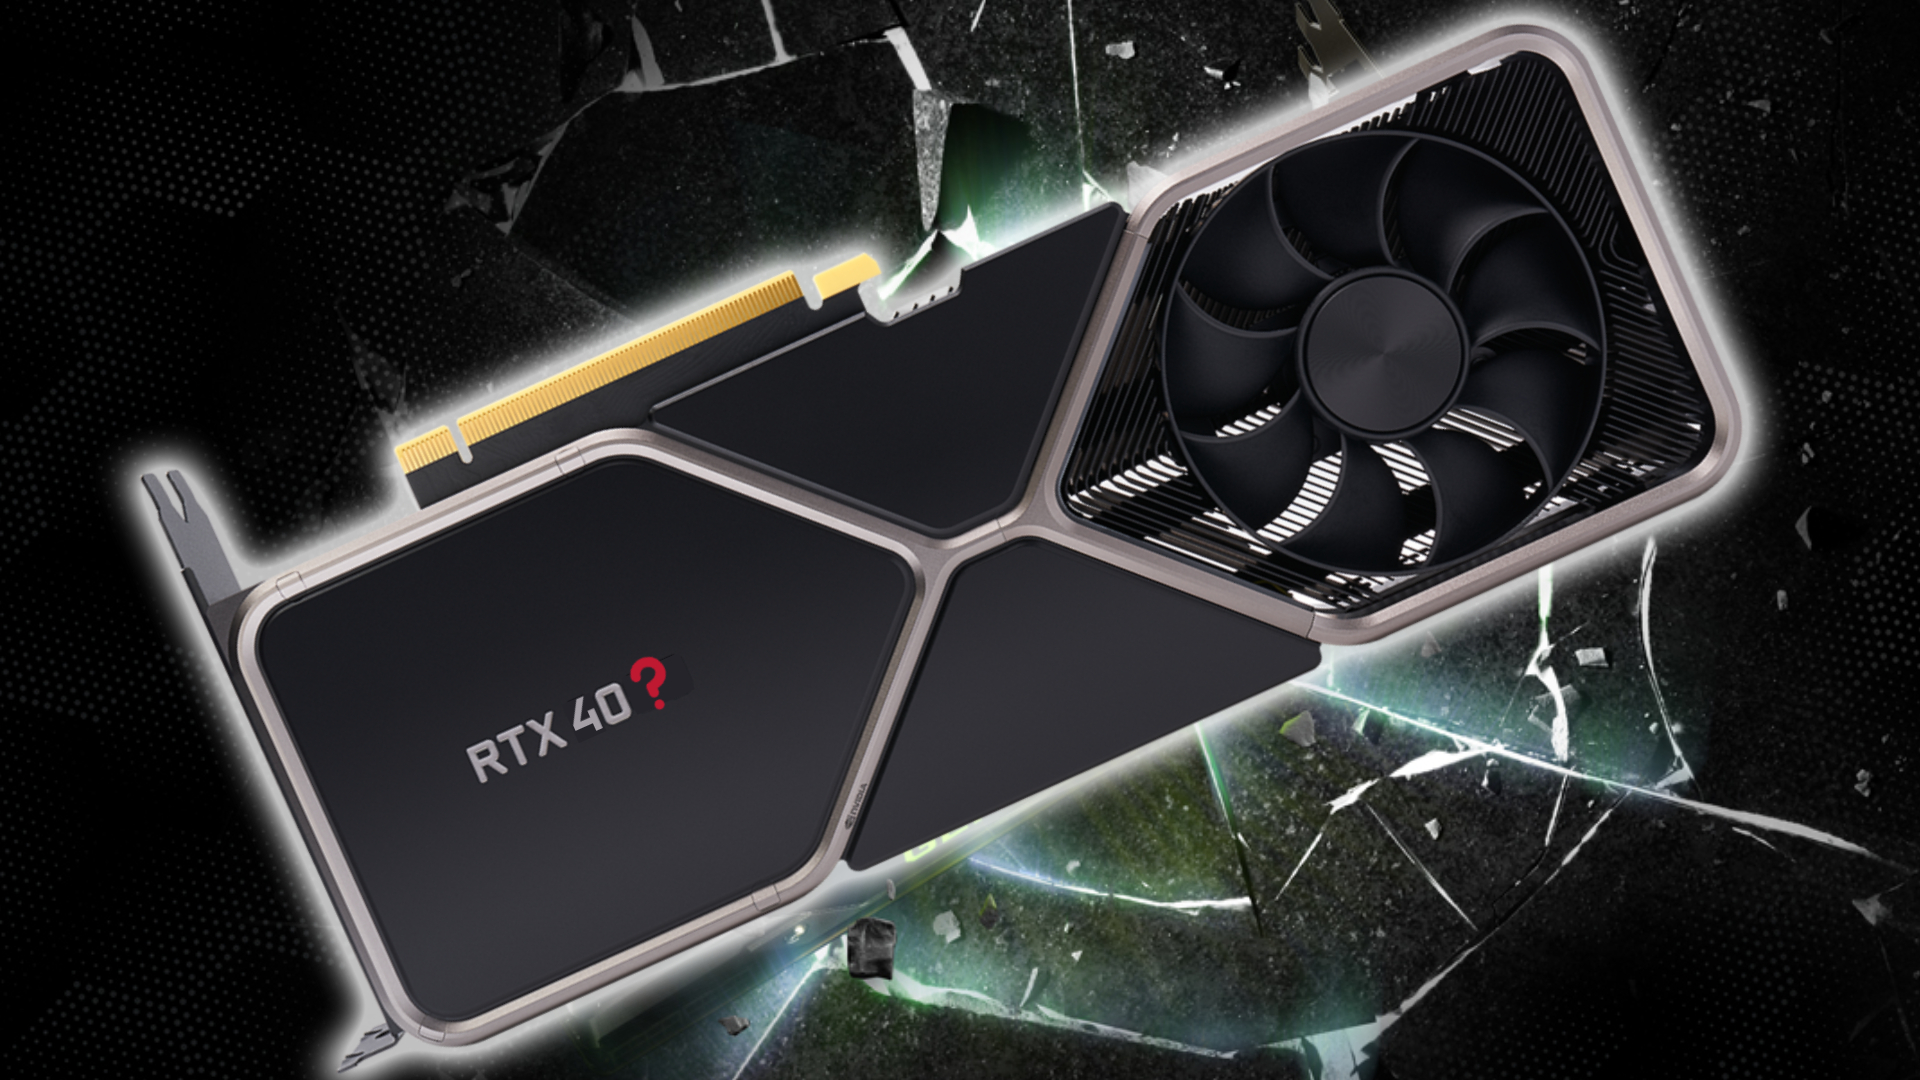 Mystery Nvidia RTX 4000 GPU features twice the power of RTX 3000